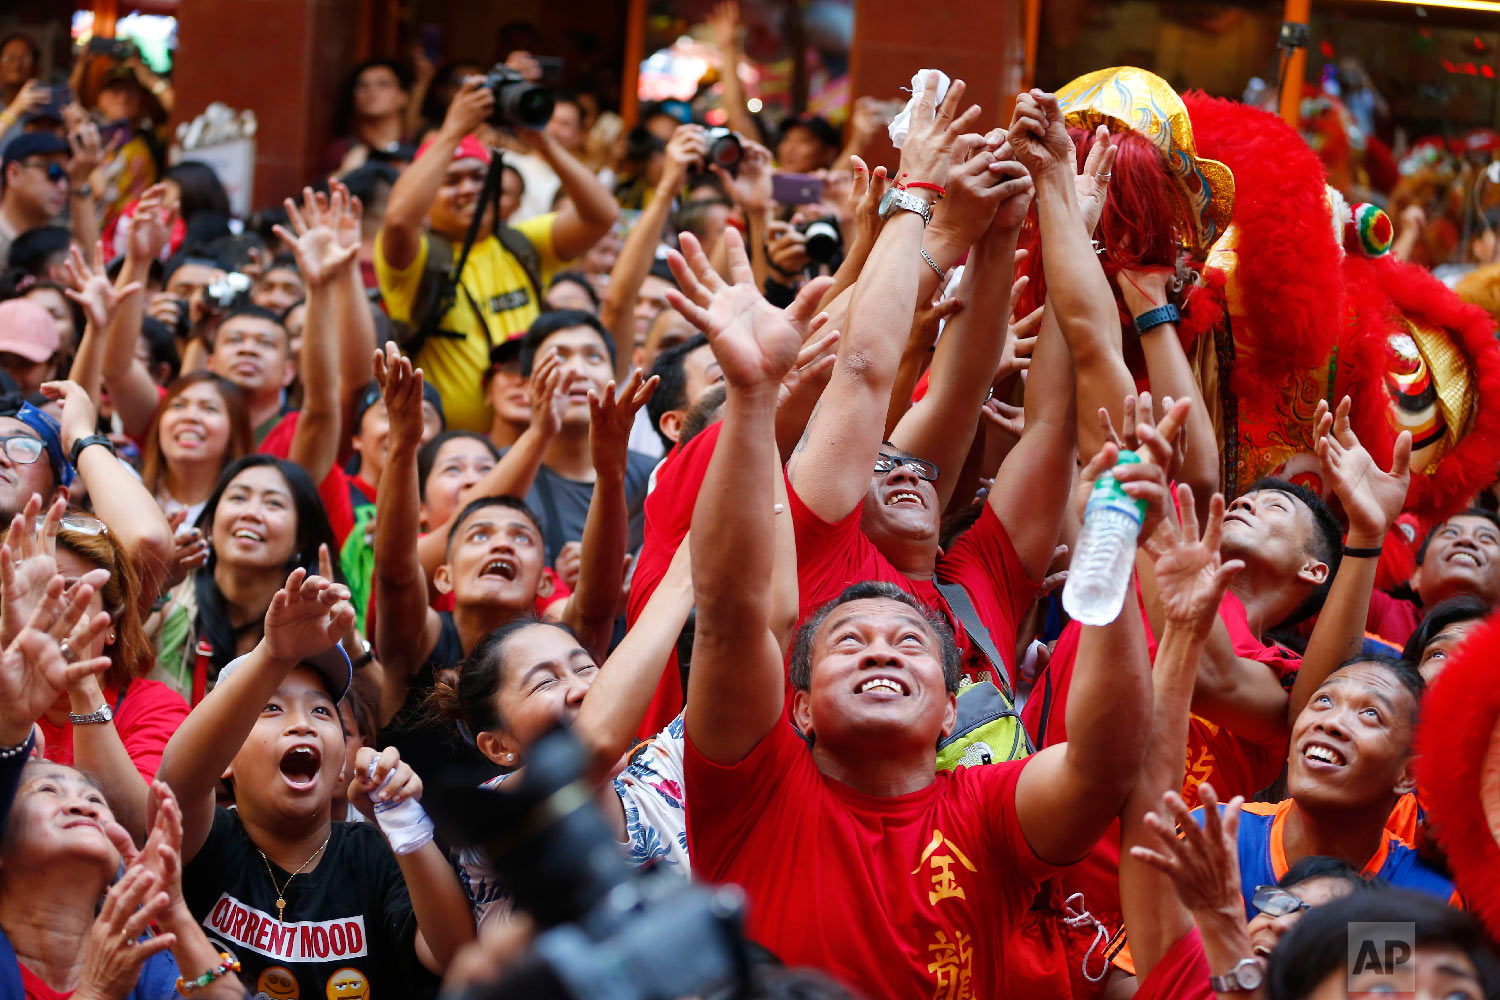  Crowds jostle to grab festive items being thrown at them during celebrations of the Lunar New Year in the Chinatown district in Manila, Philippines, Tuesday, Feb. 5, 2019. (AP Photo/Bullit Marquez) 